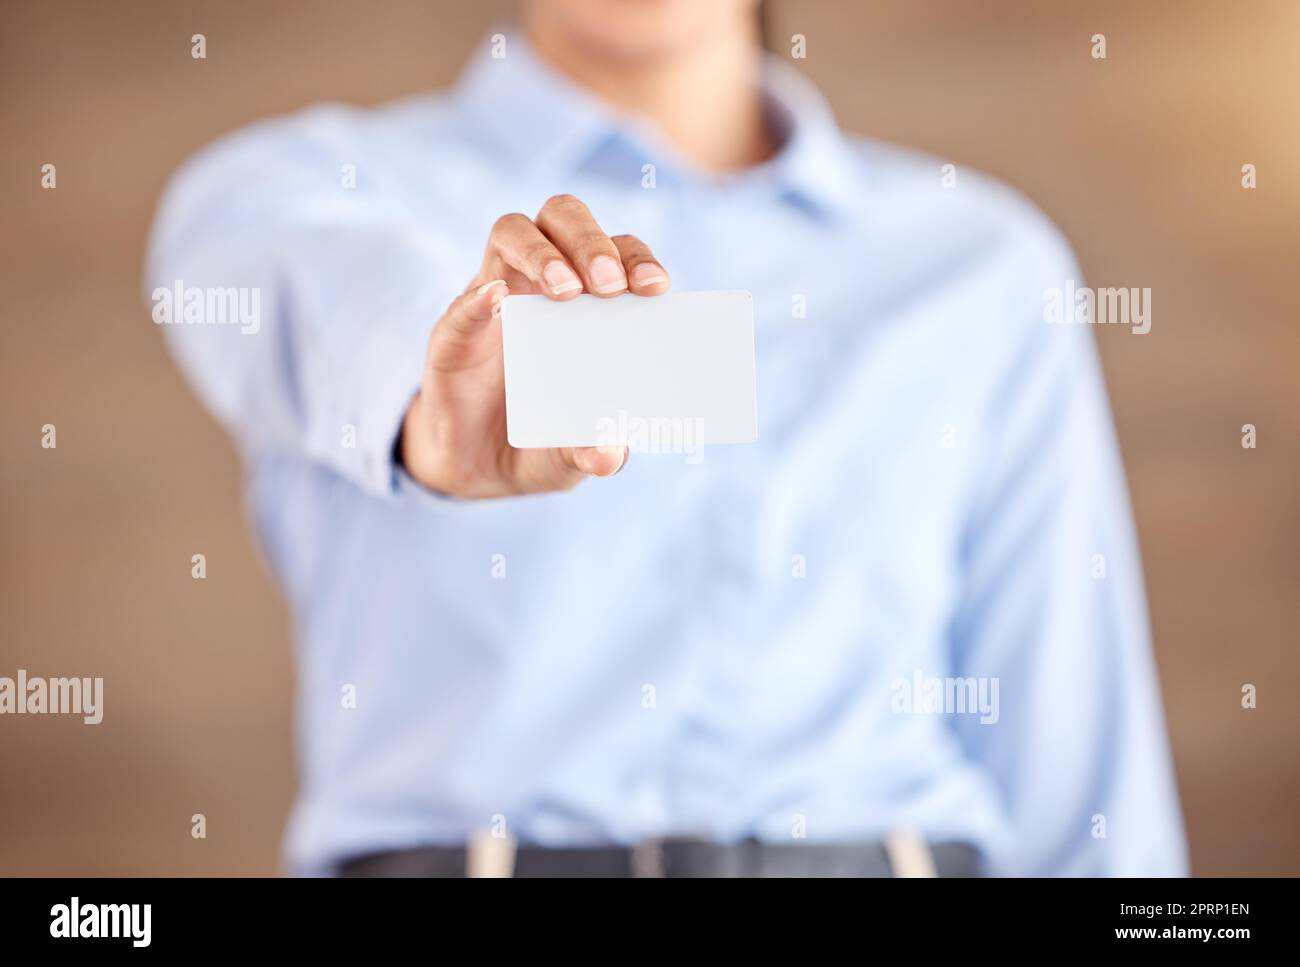 Business card mockup, hand and advertising for corporate information and company marketing at work. Hands offering blank board for market brand, logo and design on professional cards for clients Stock Photo